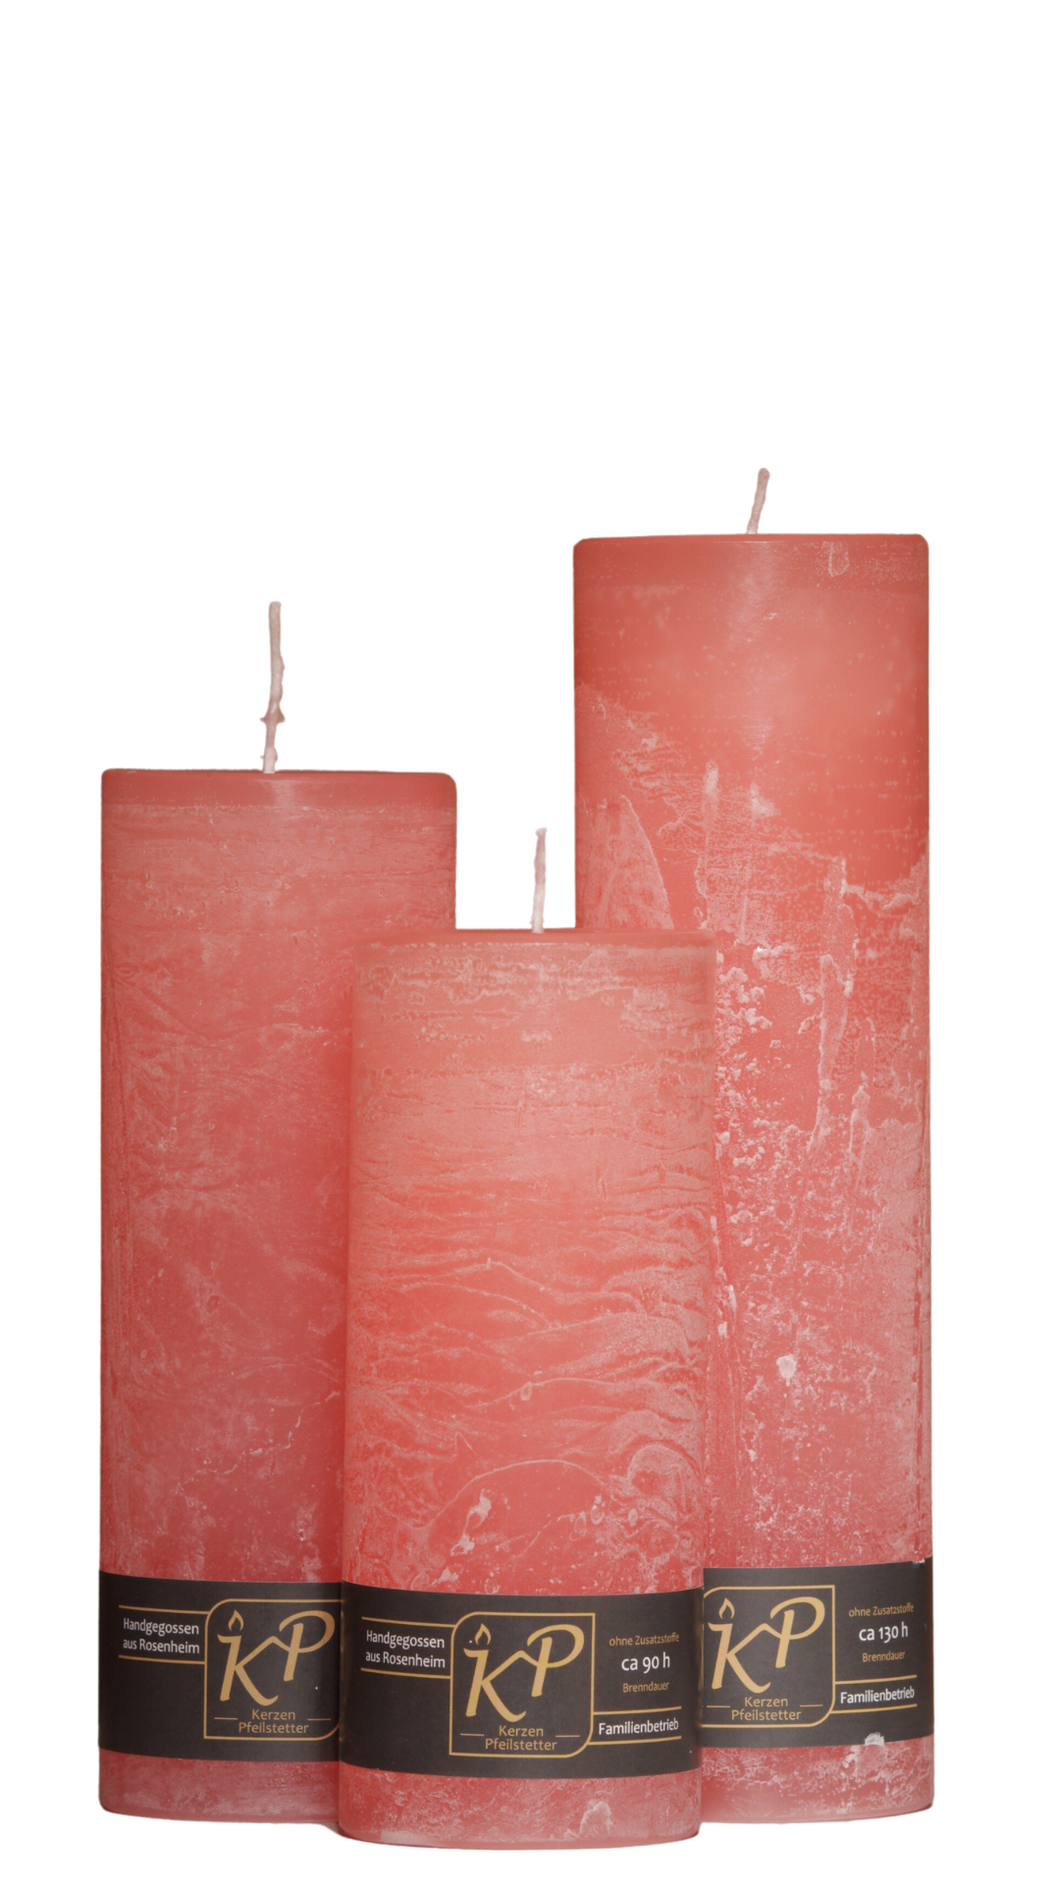 Dalina flower candle | coral | ~ 130h burning time